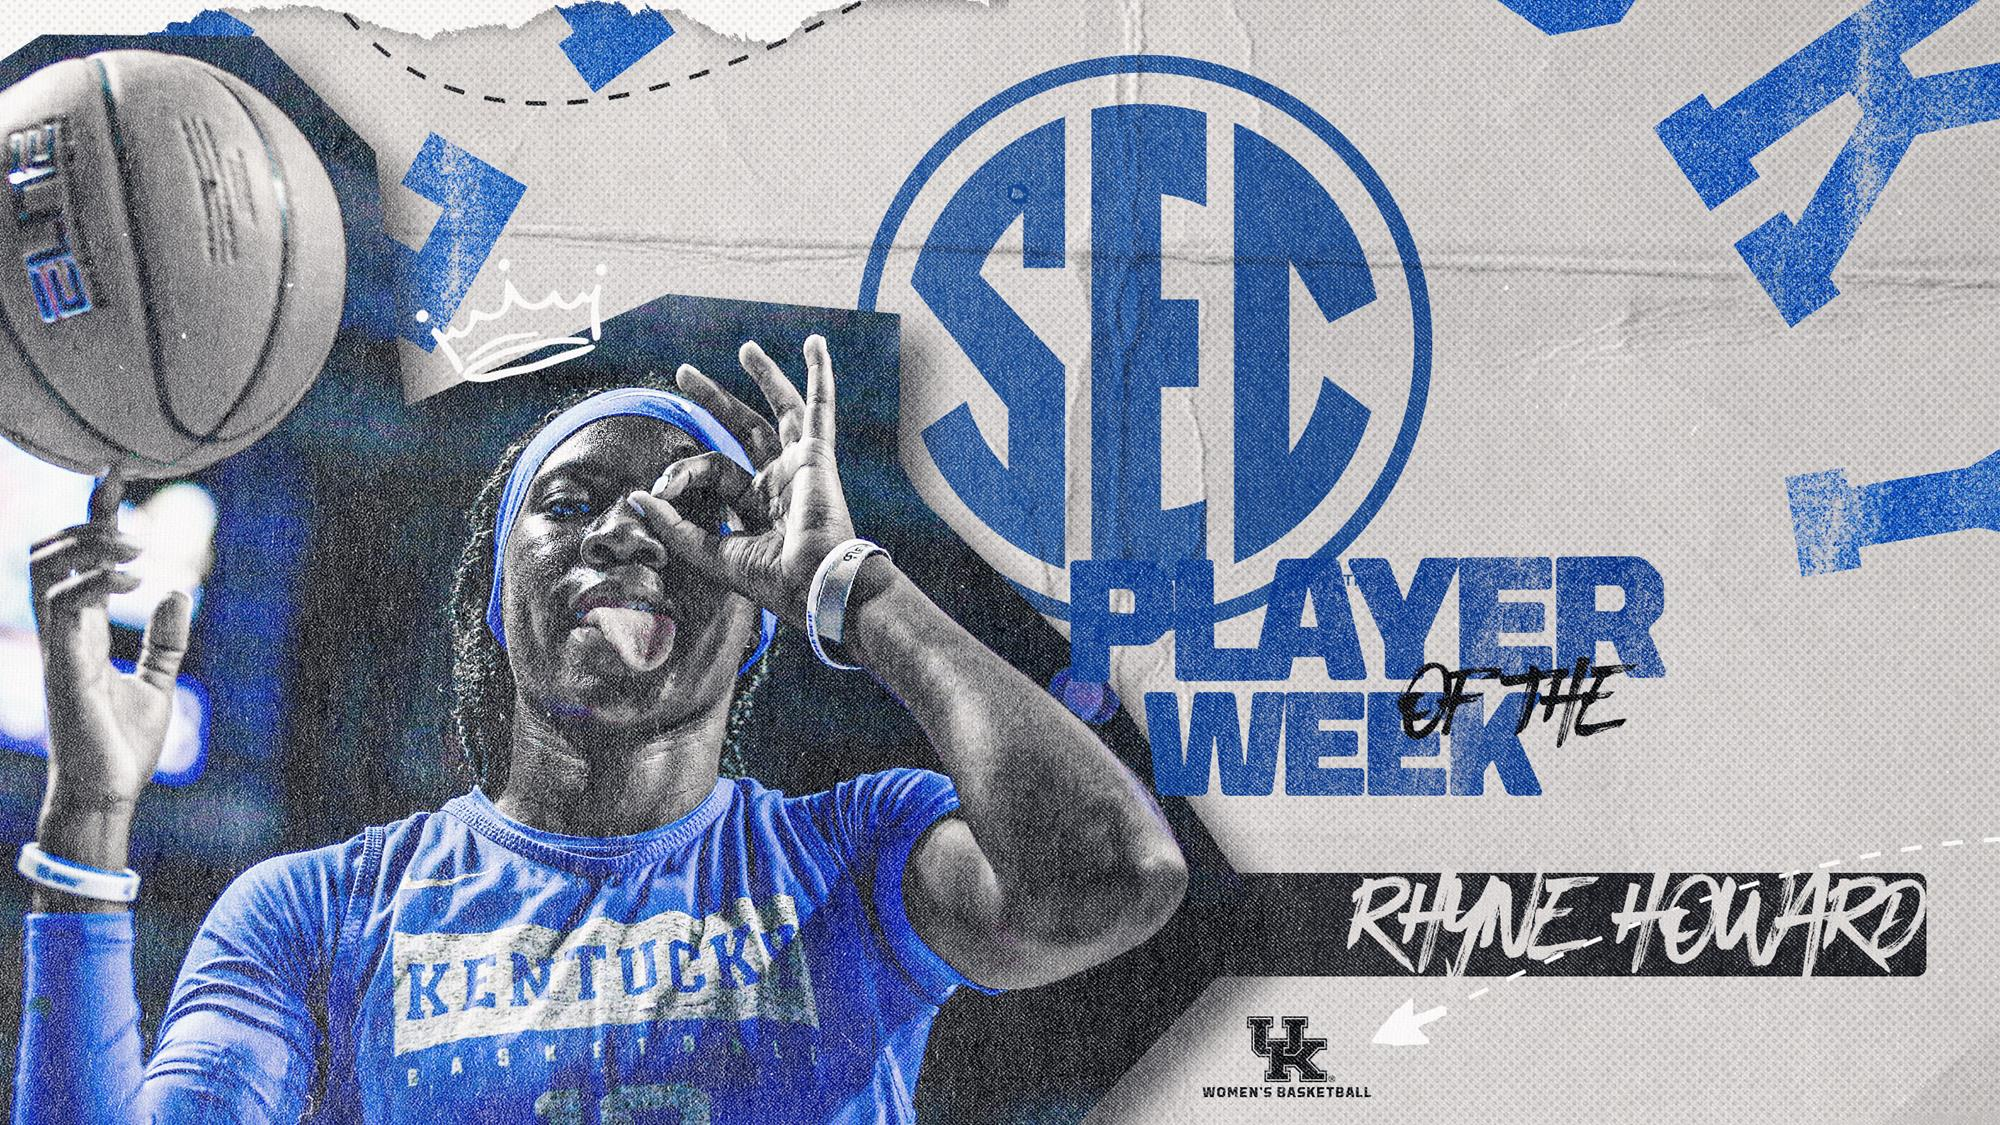 Howard Earns Back-to-Back SEC Player of the Week Honors